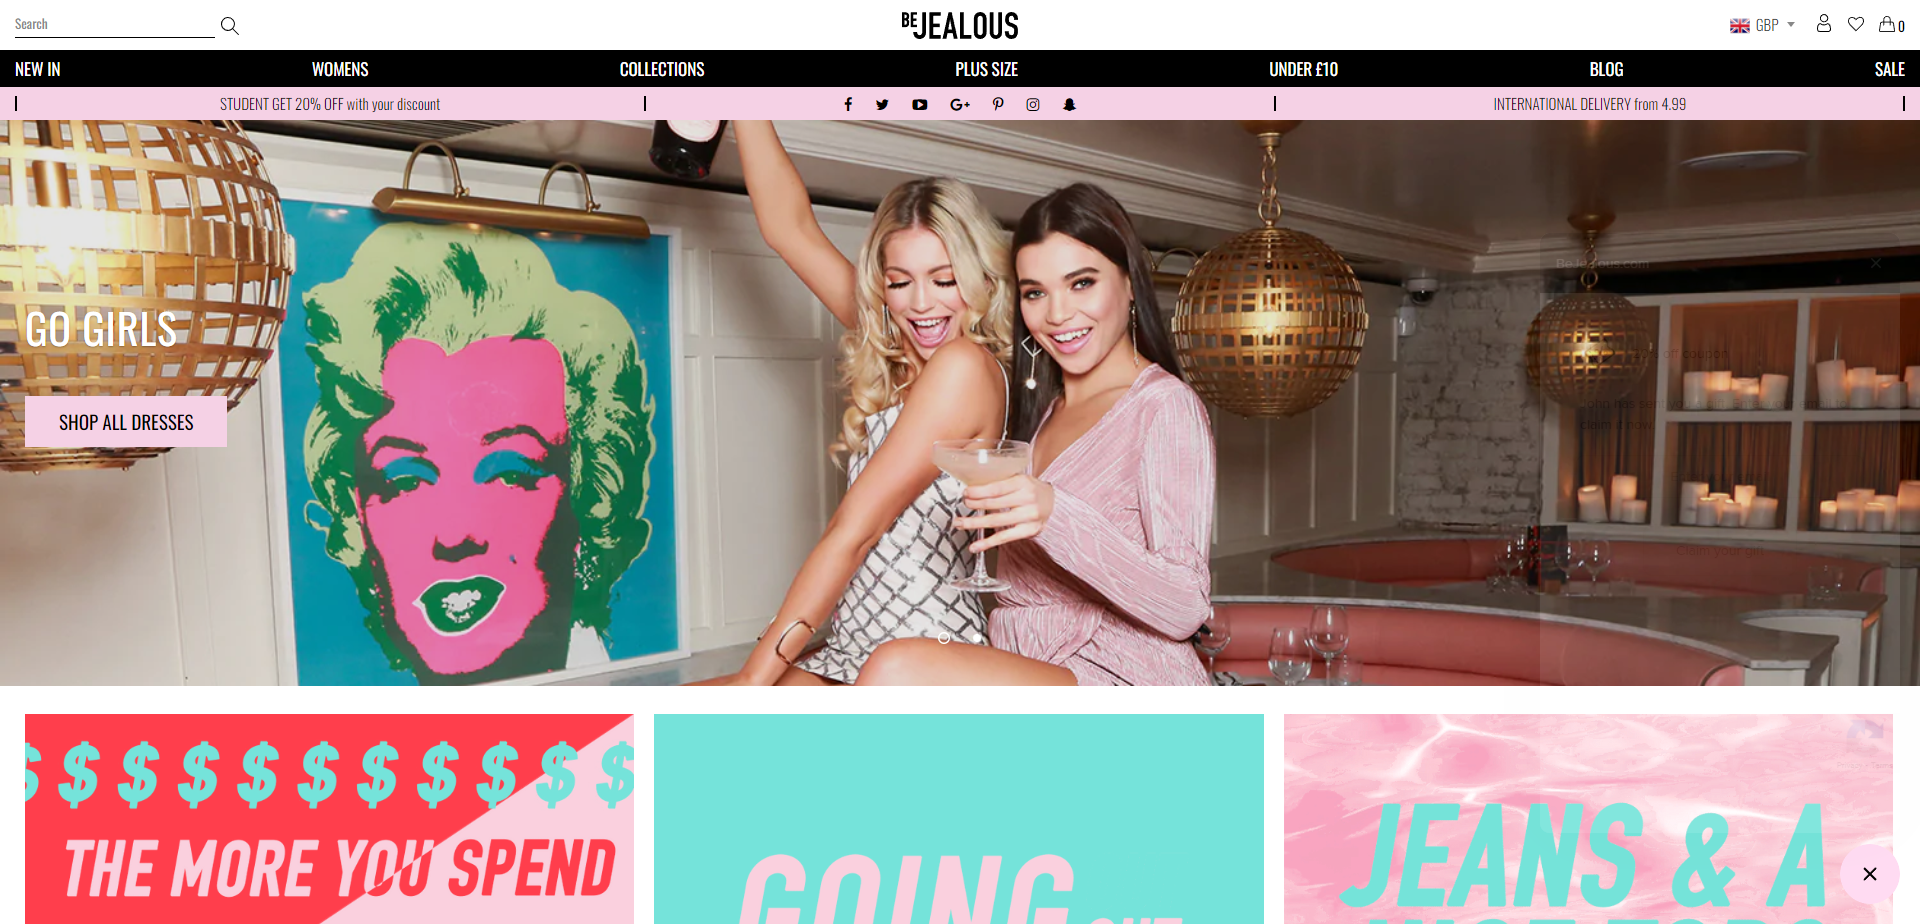 Landing Page for BeJealous